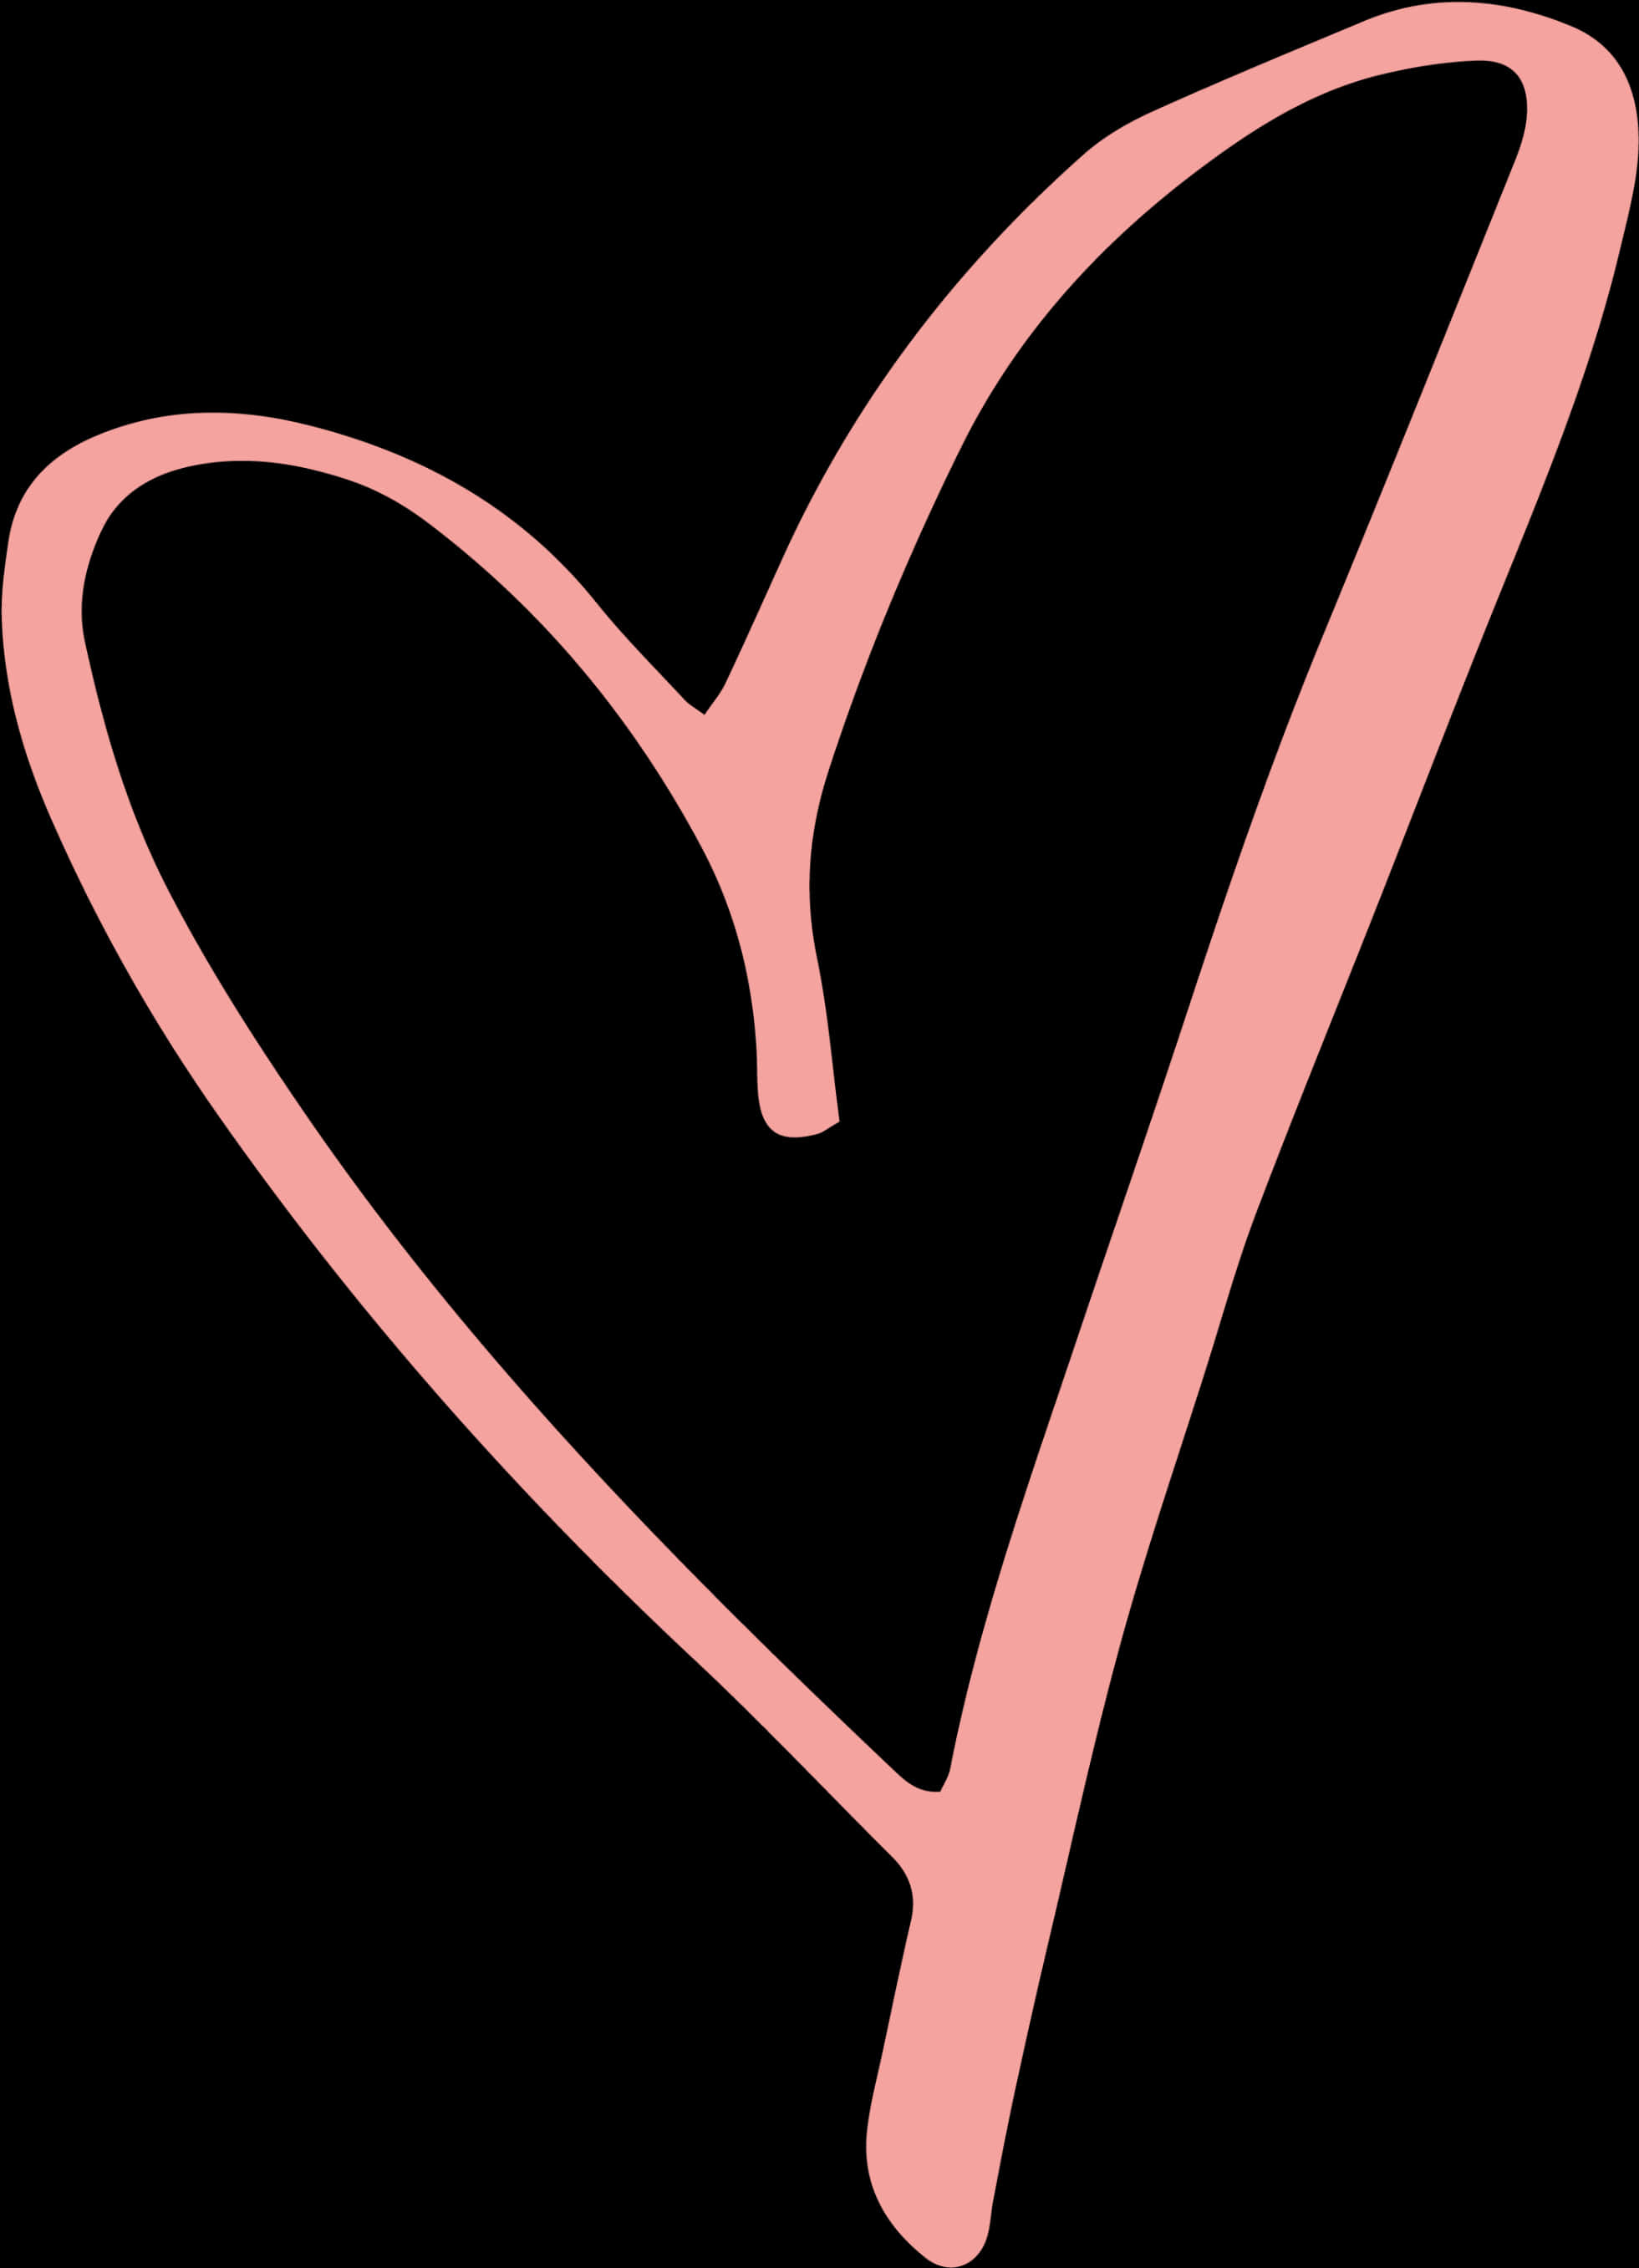 Minimalist Pink Heart Outline PNG